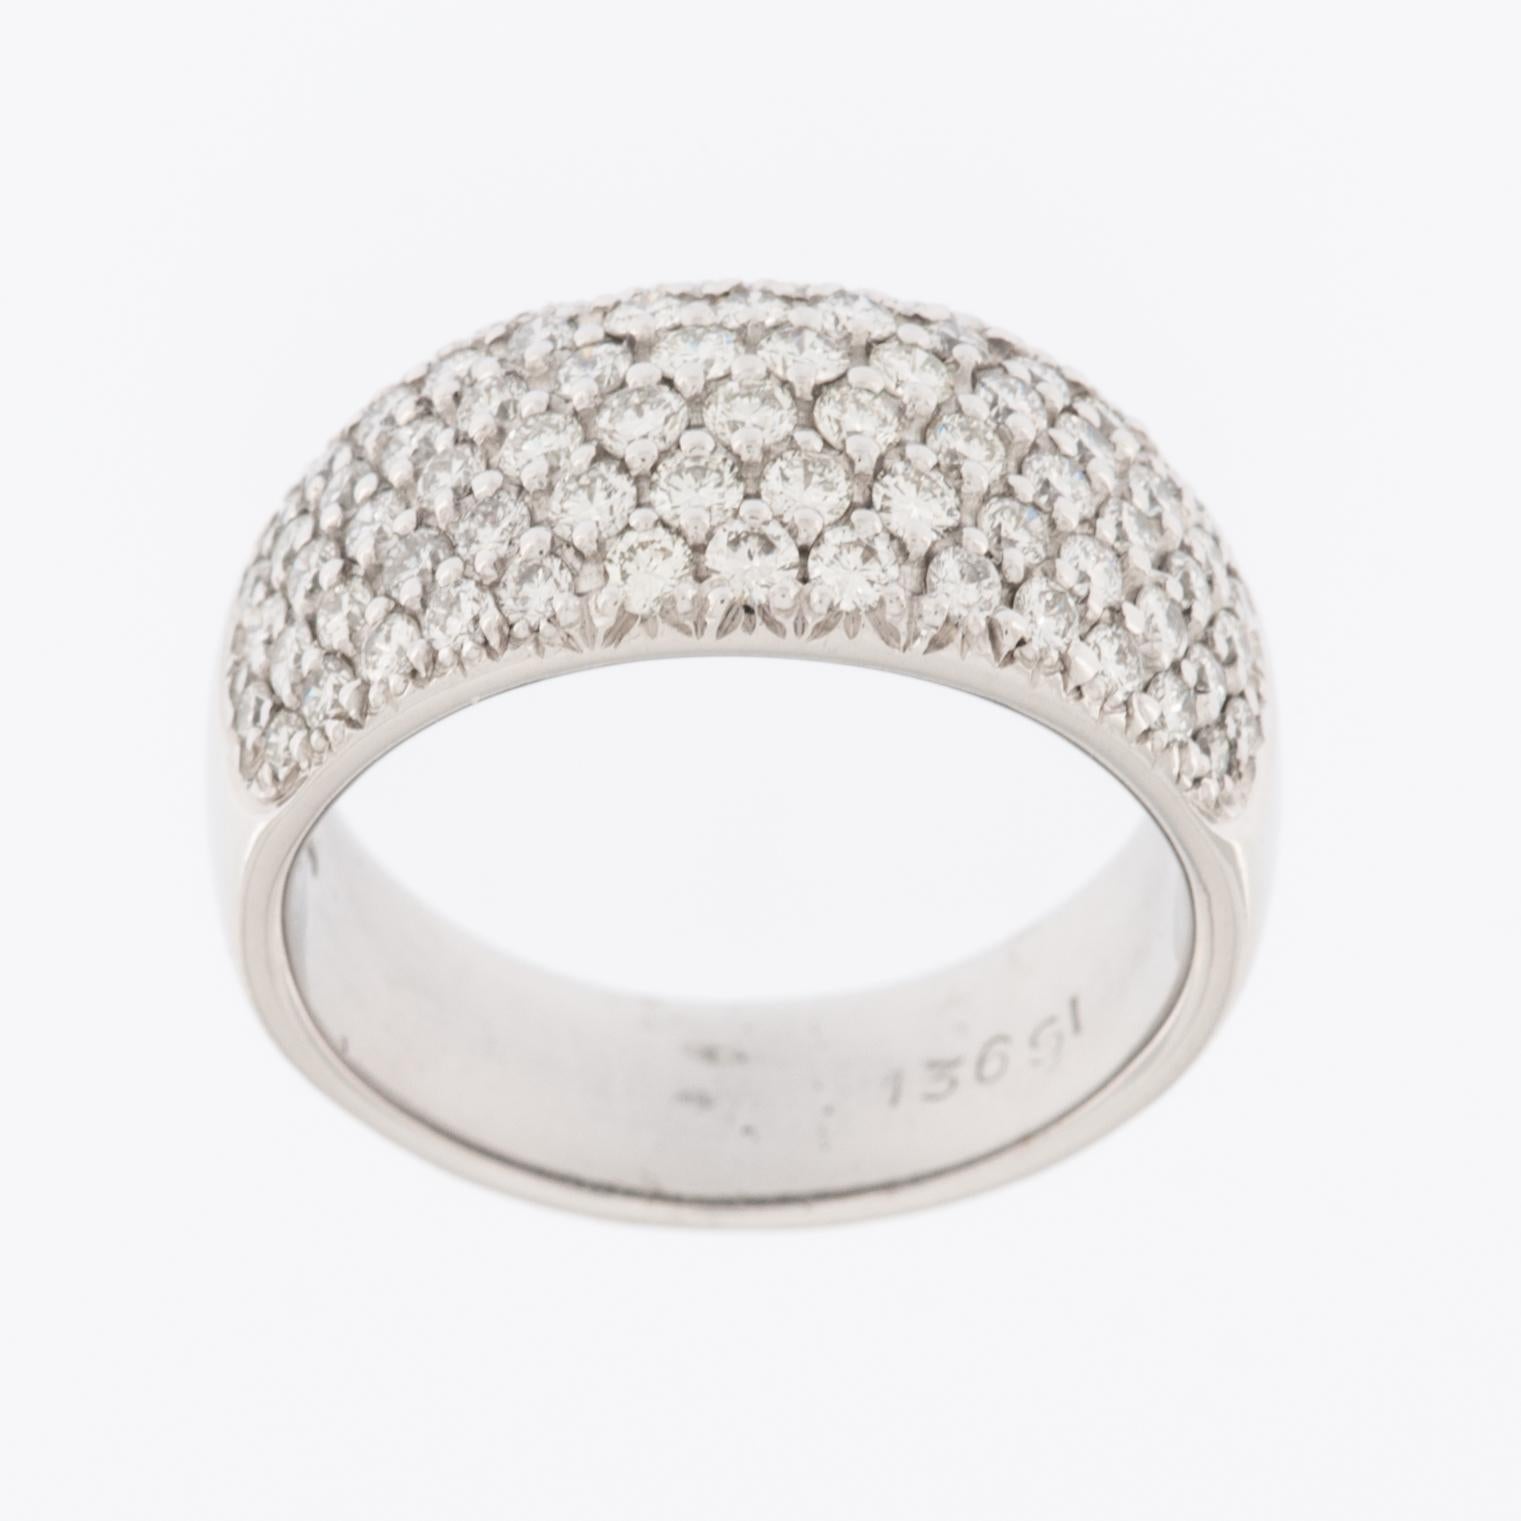 This modern 18kt white gold ring band is a stunning and elegant piece of jewelry. The use of 18-karat white gold gives the ring a luxurious and contemporary feel, while the white gold metal adds a touch of sophistication.

The ring features a design